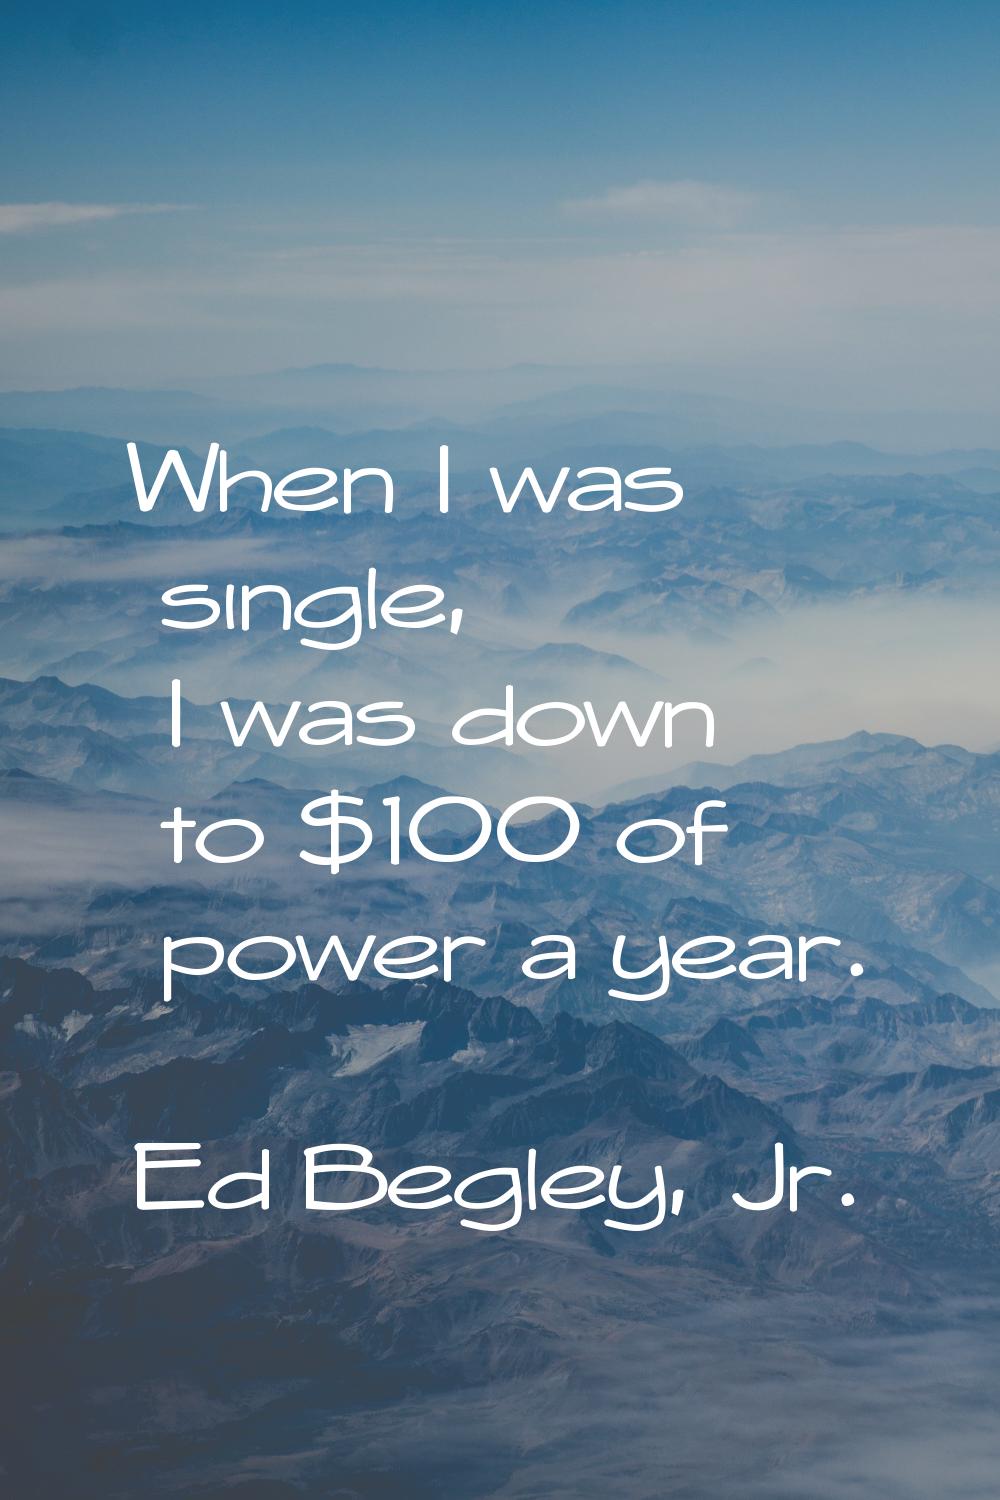 When I was single, I was down to $100 of power a year.